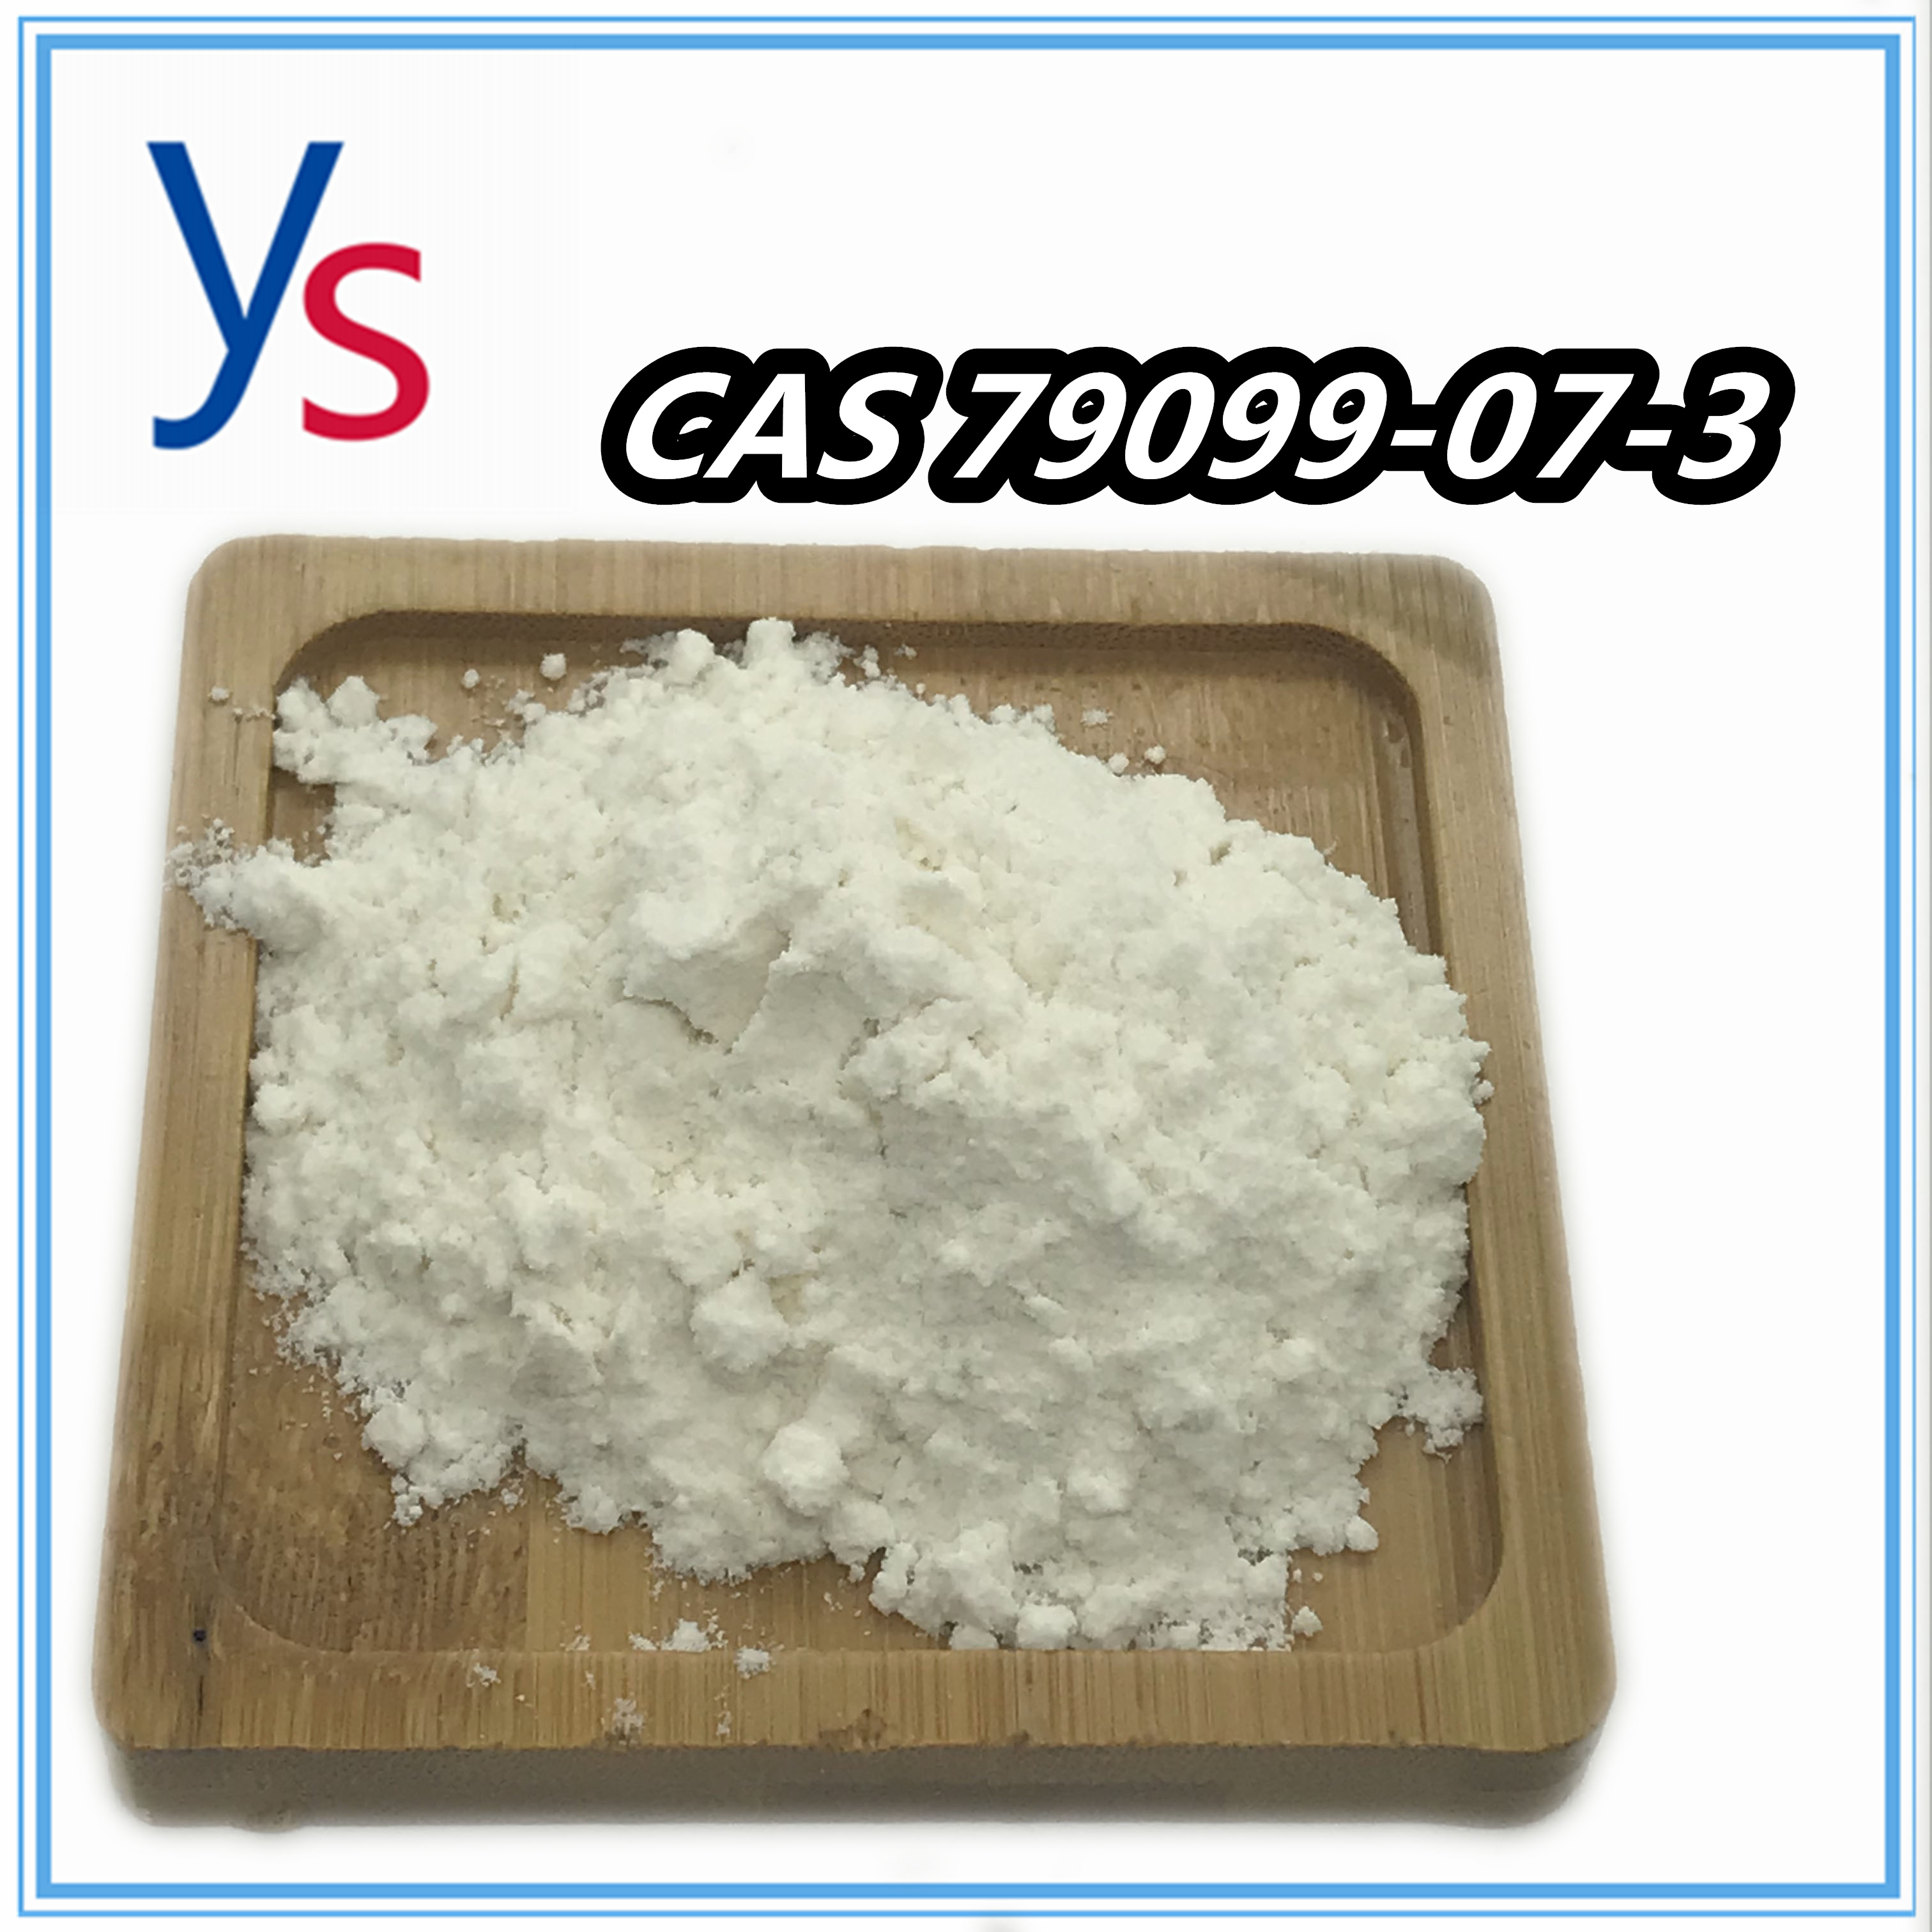  CAS 79099-07-3 Pharmaceutical Chemical With Hihg Purity 